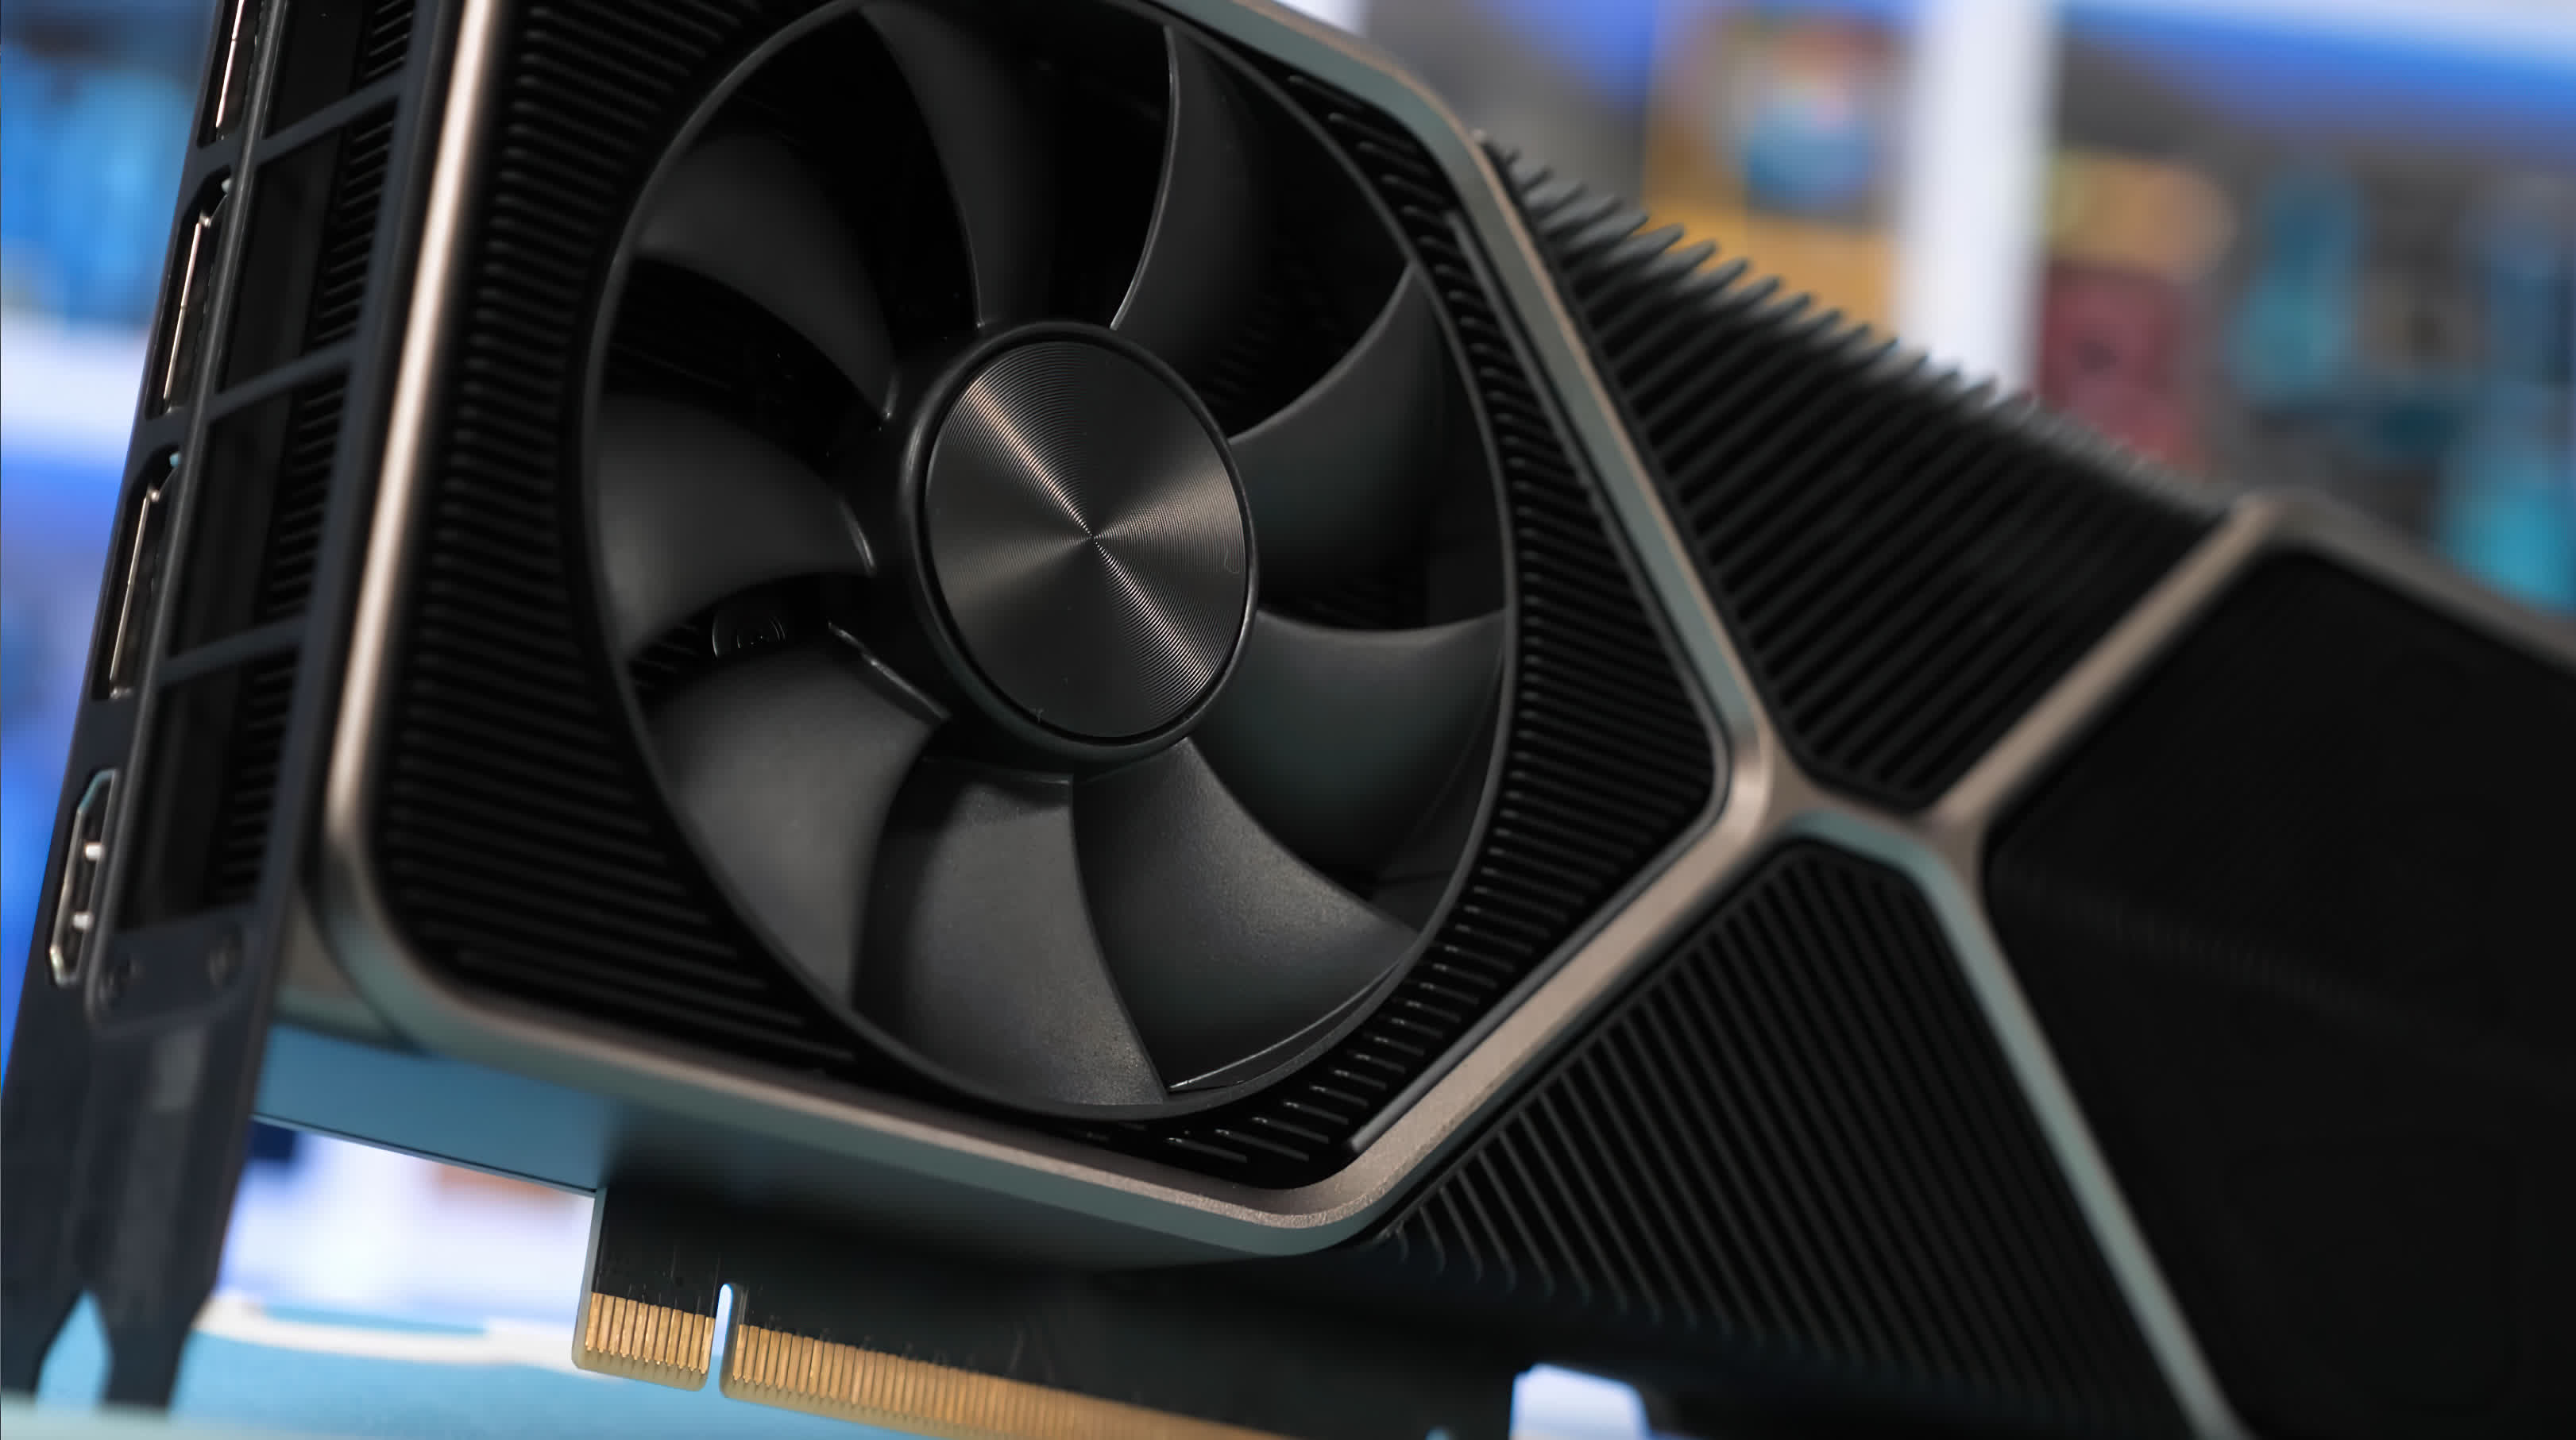 RTX 3070 results appear on Geekbench, suggest it will outperform the RTX 2080 Ti